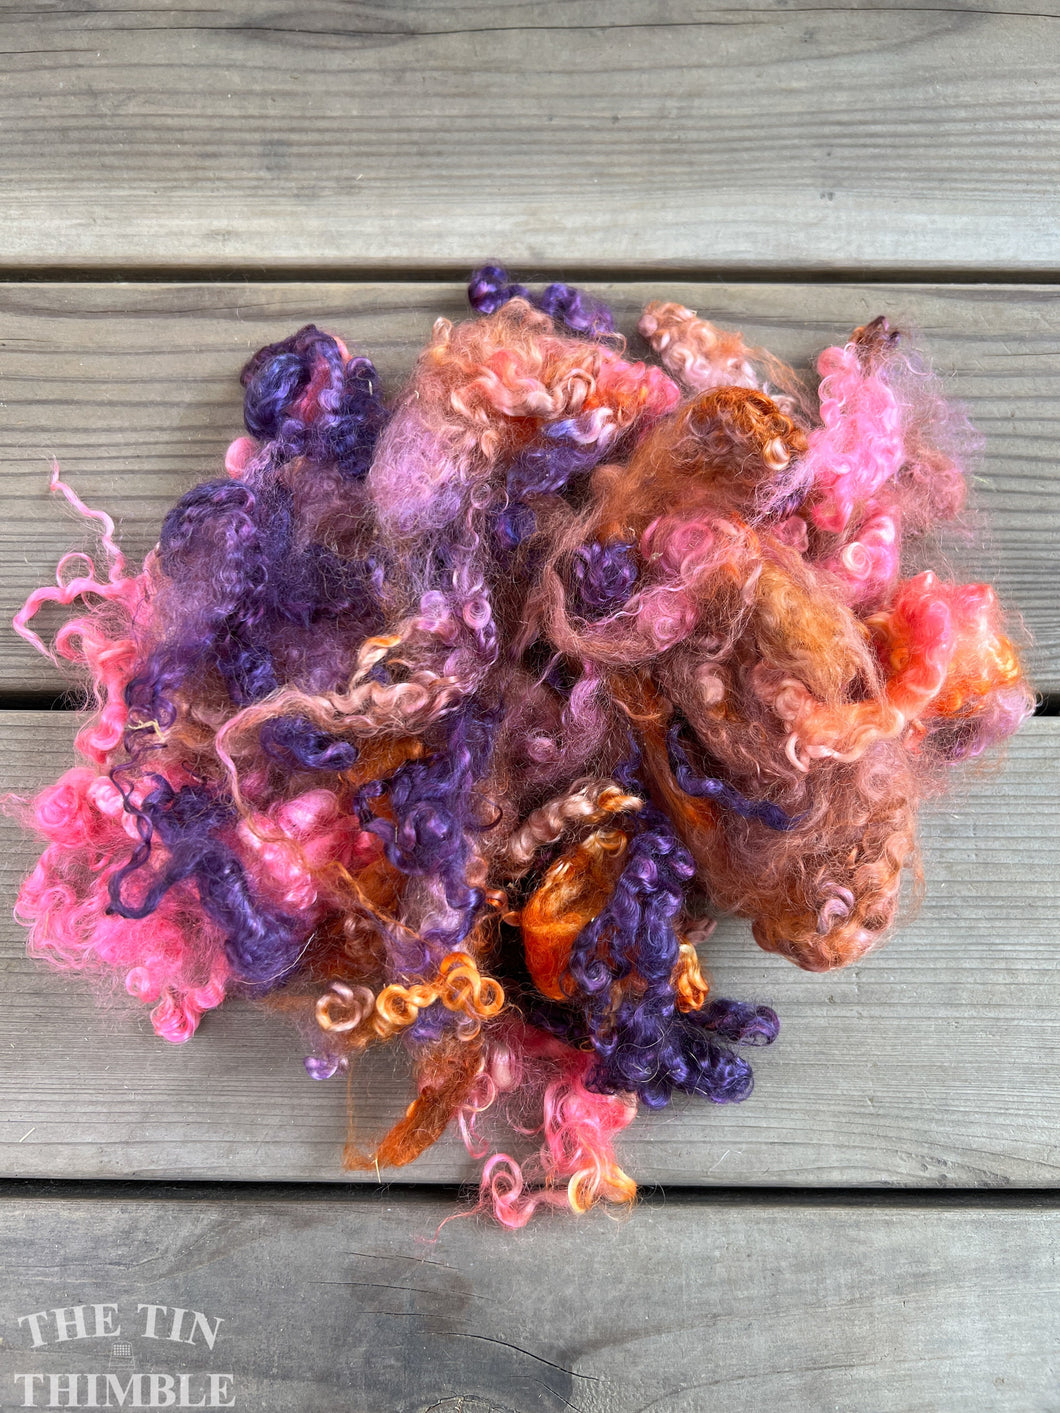 Mohair Locks for Felting, Spinning or Weaving - 1/4 Oz - Hand Dyed in the color 